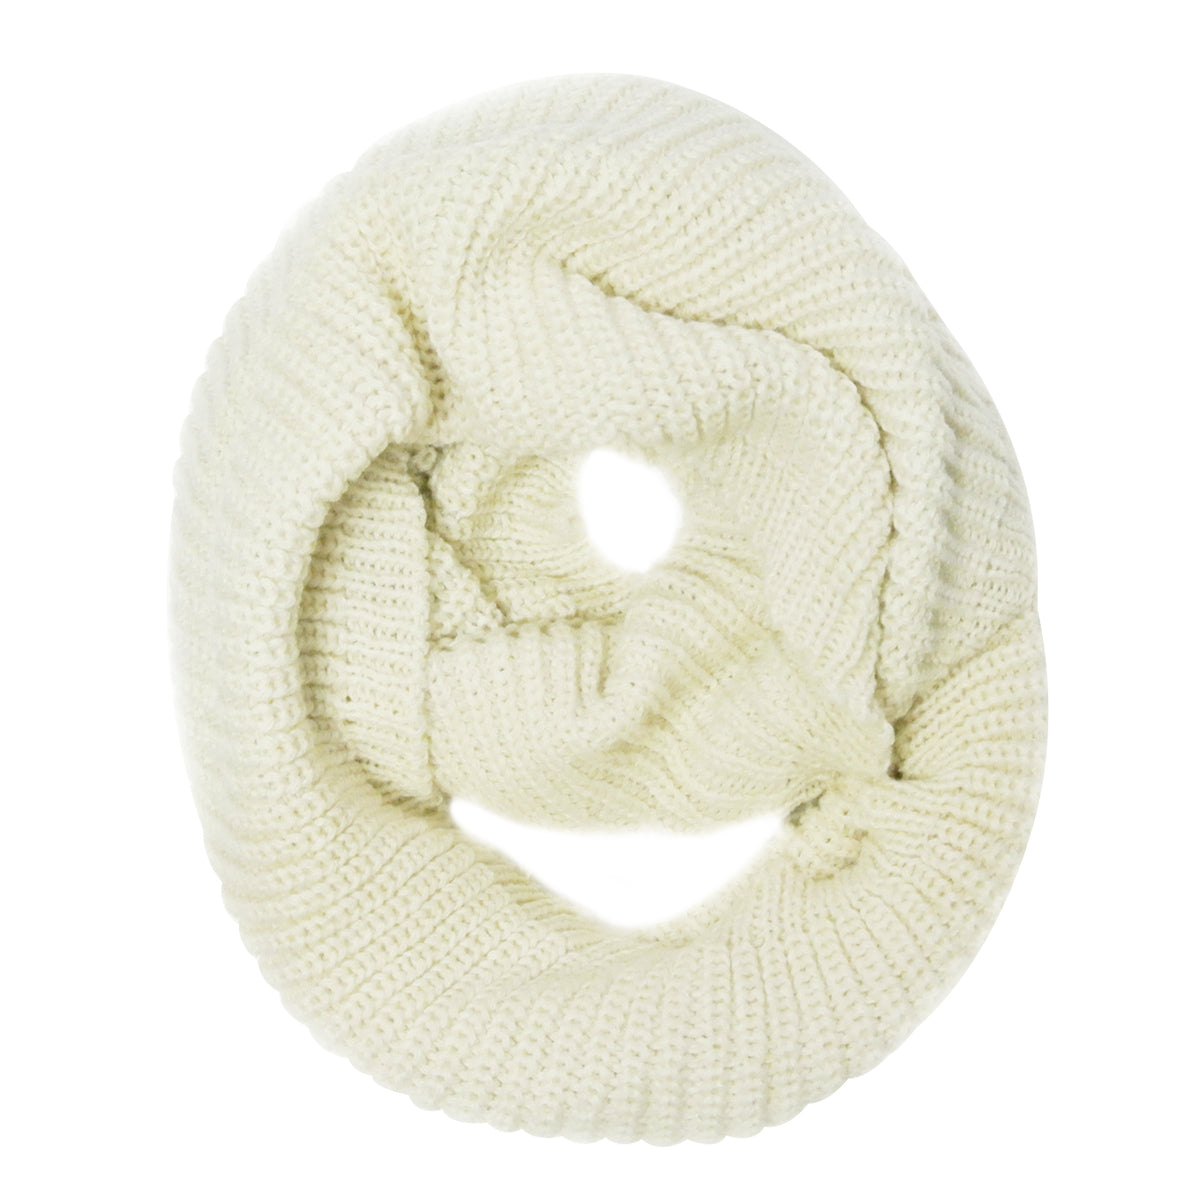 Wrapables Thick Knitted Winter Warm Infinity Scarf